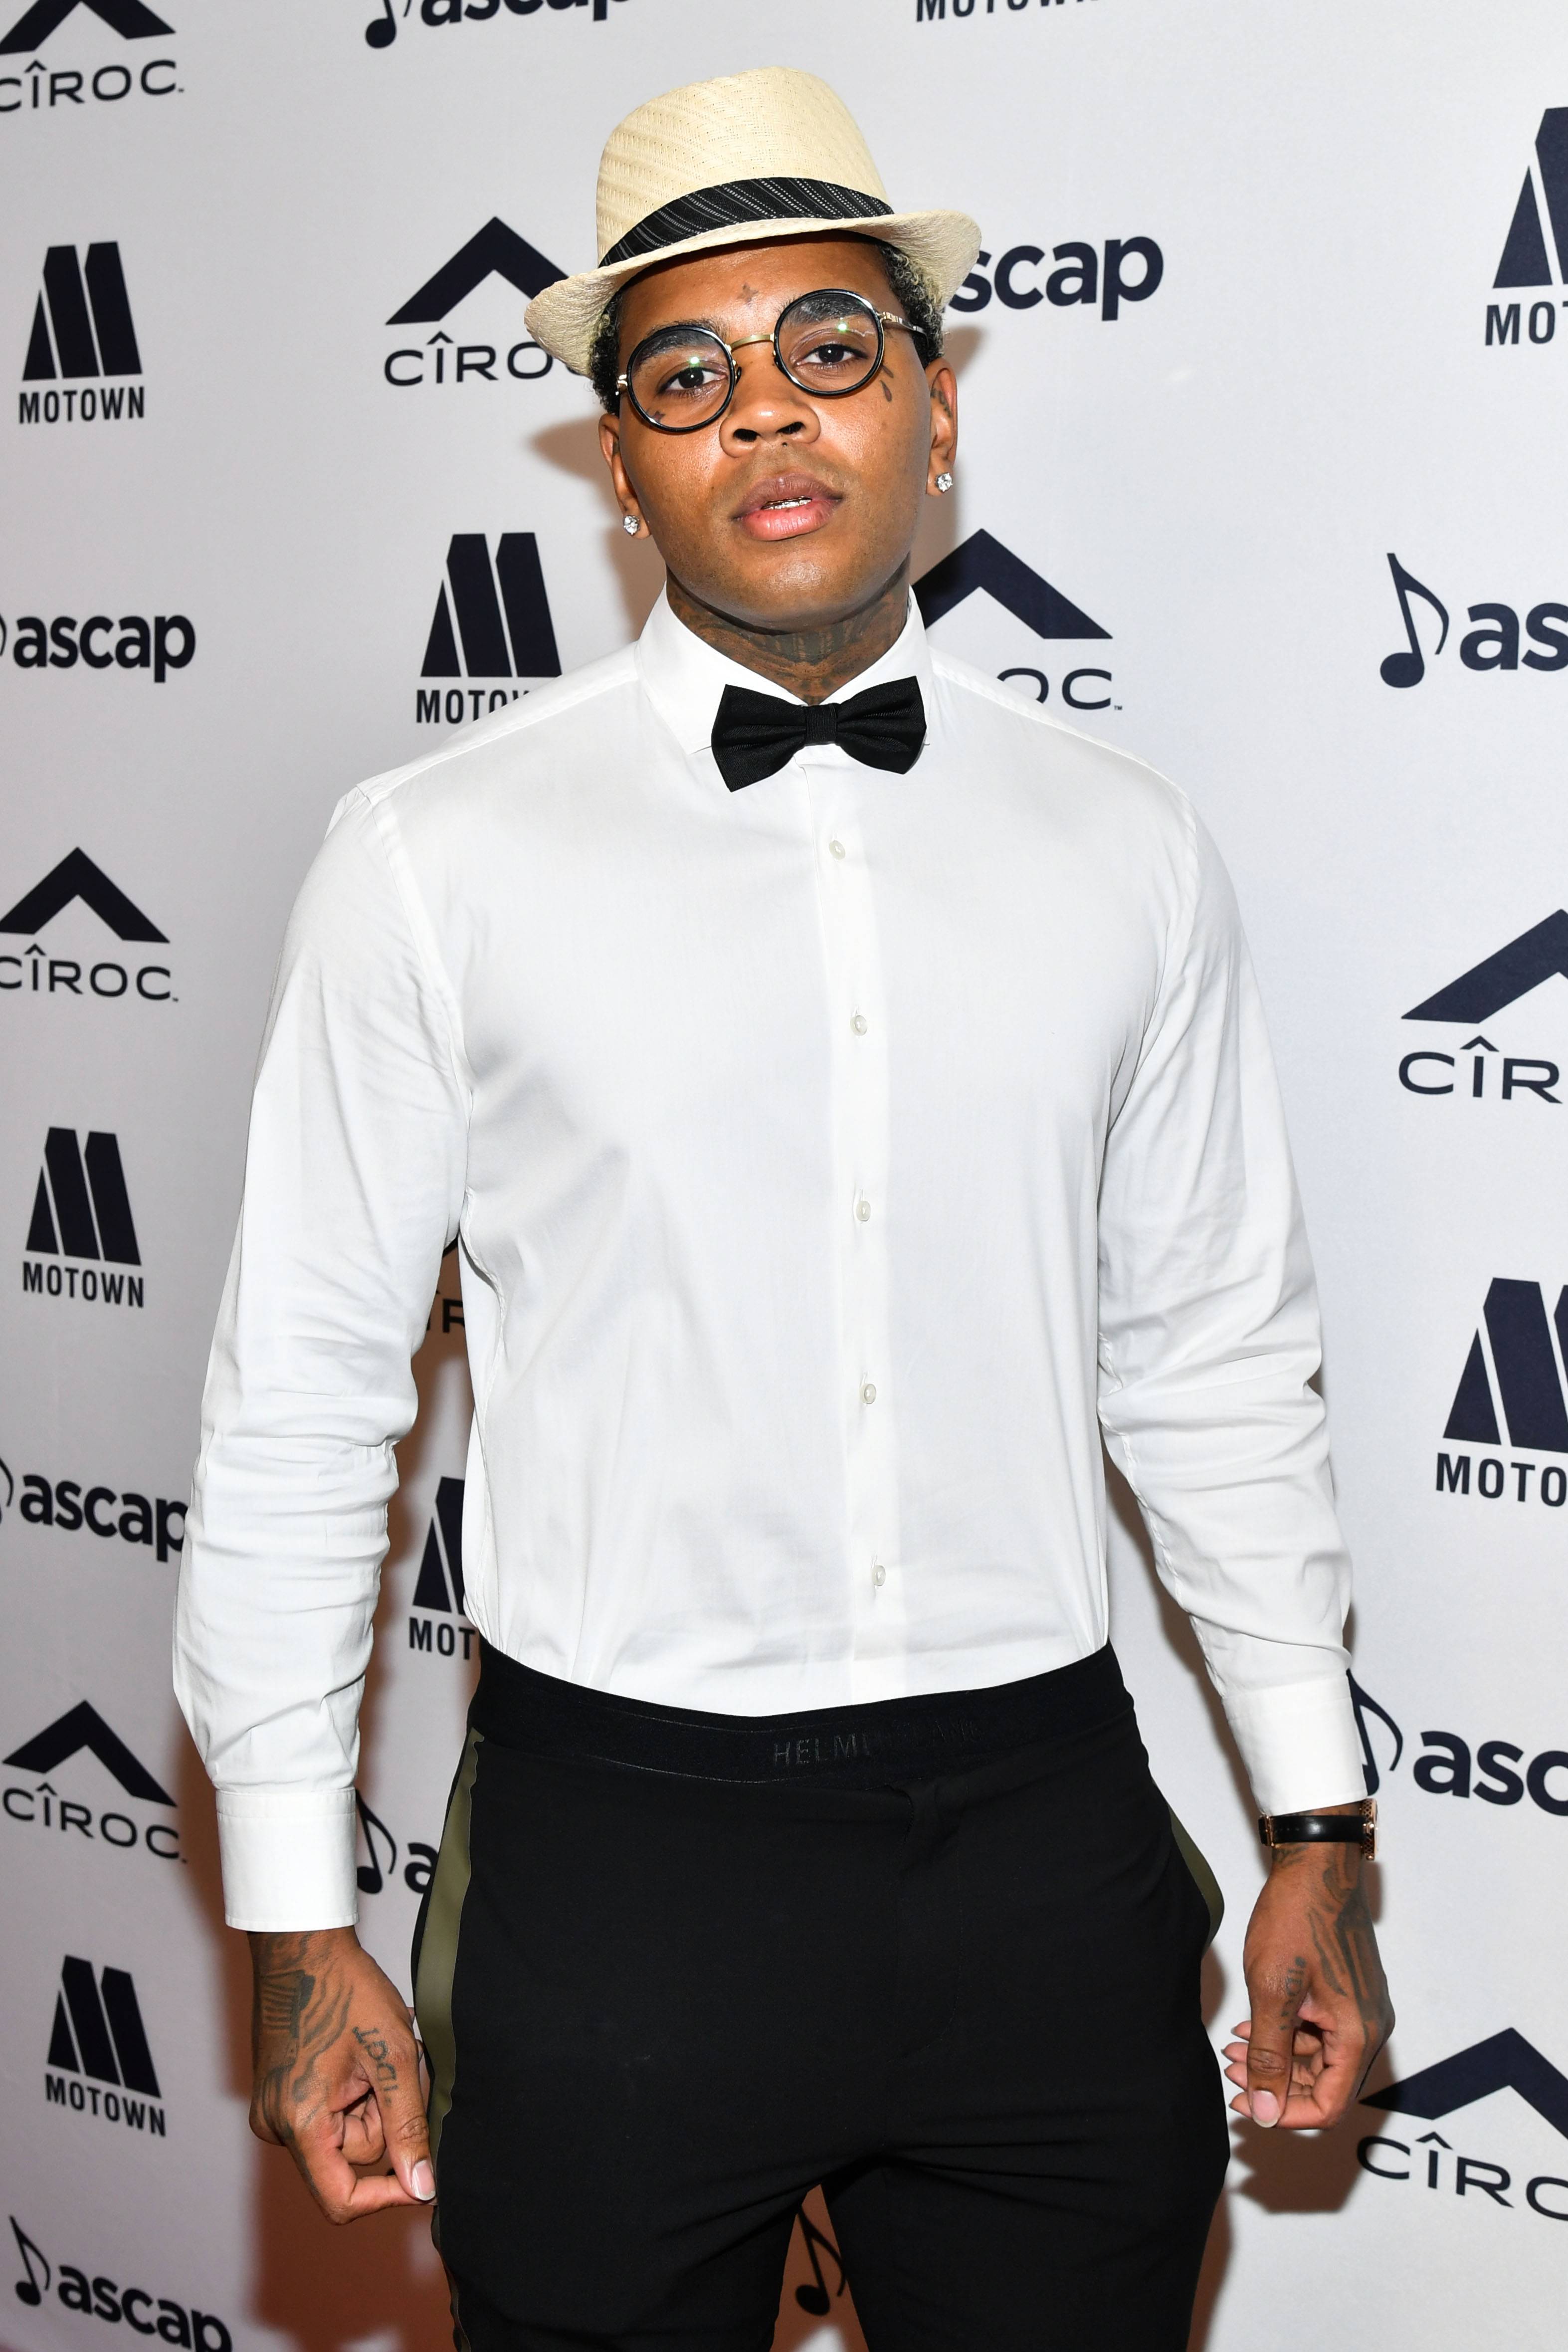 BEVERLY HILLS, CALIFORNIA - JUNE 20: Kevin Gates attends the 2019 ASCAP Rhythm & Soul Music Awards at the Beverly Wilshire Four Seasons Hotel on June 20, 2019 in Beverly Hills, California. (Photo by Amy Sussman/Getty Images)